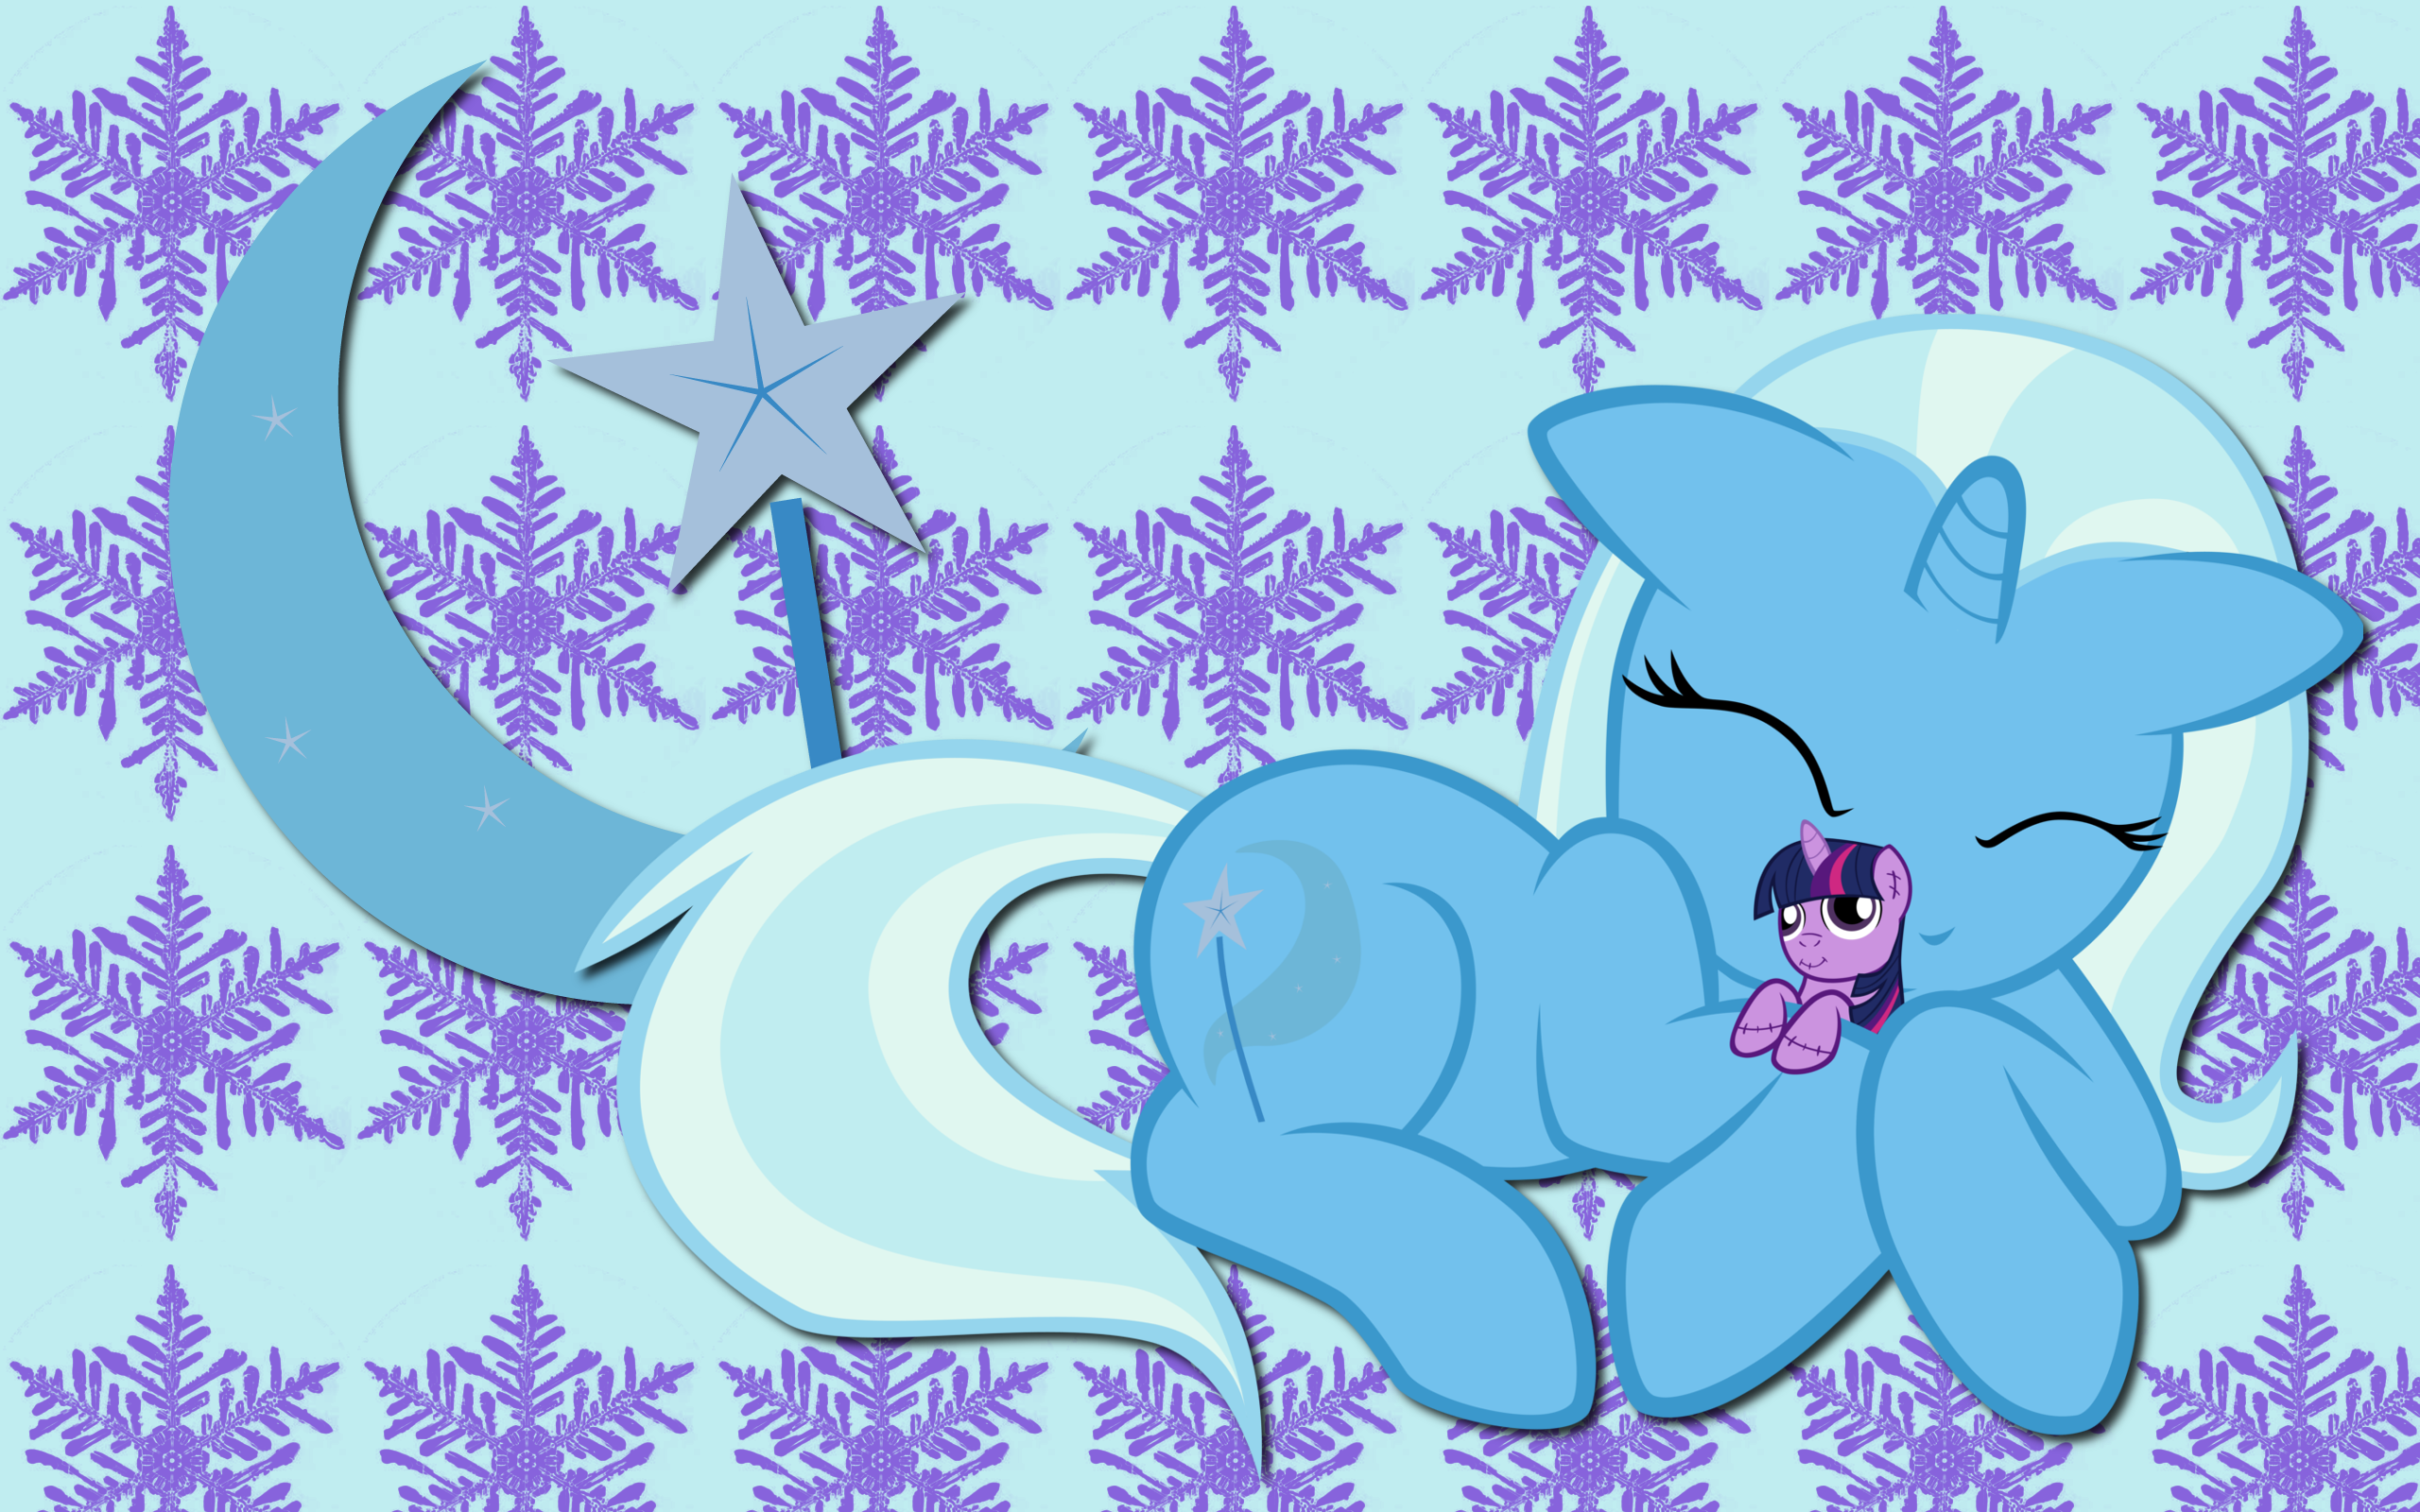 Trixie wallpaper 7 by AliceHumanSacrifice0, MaximillianVeers and ooklah